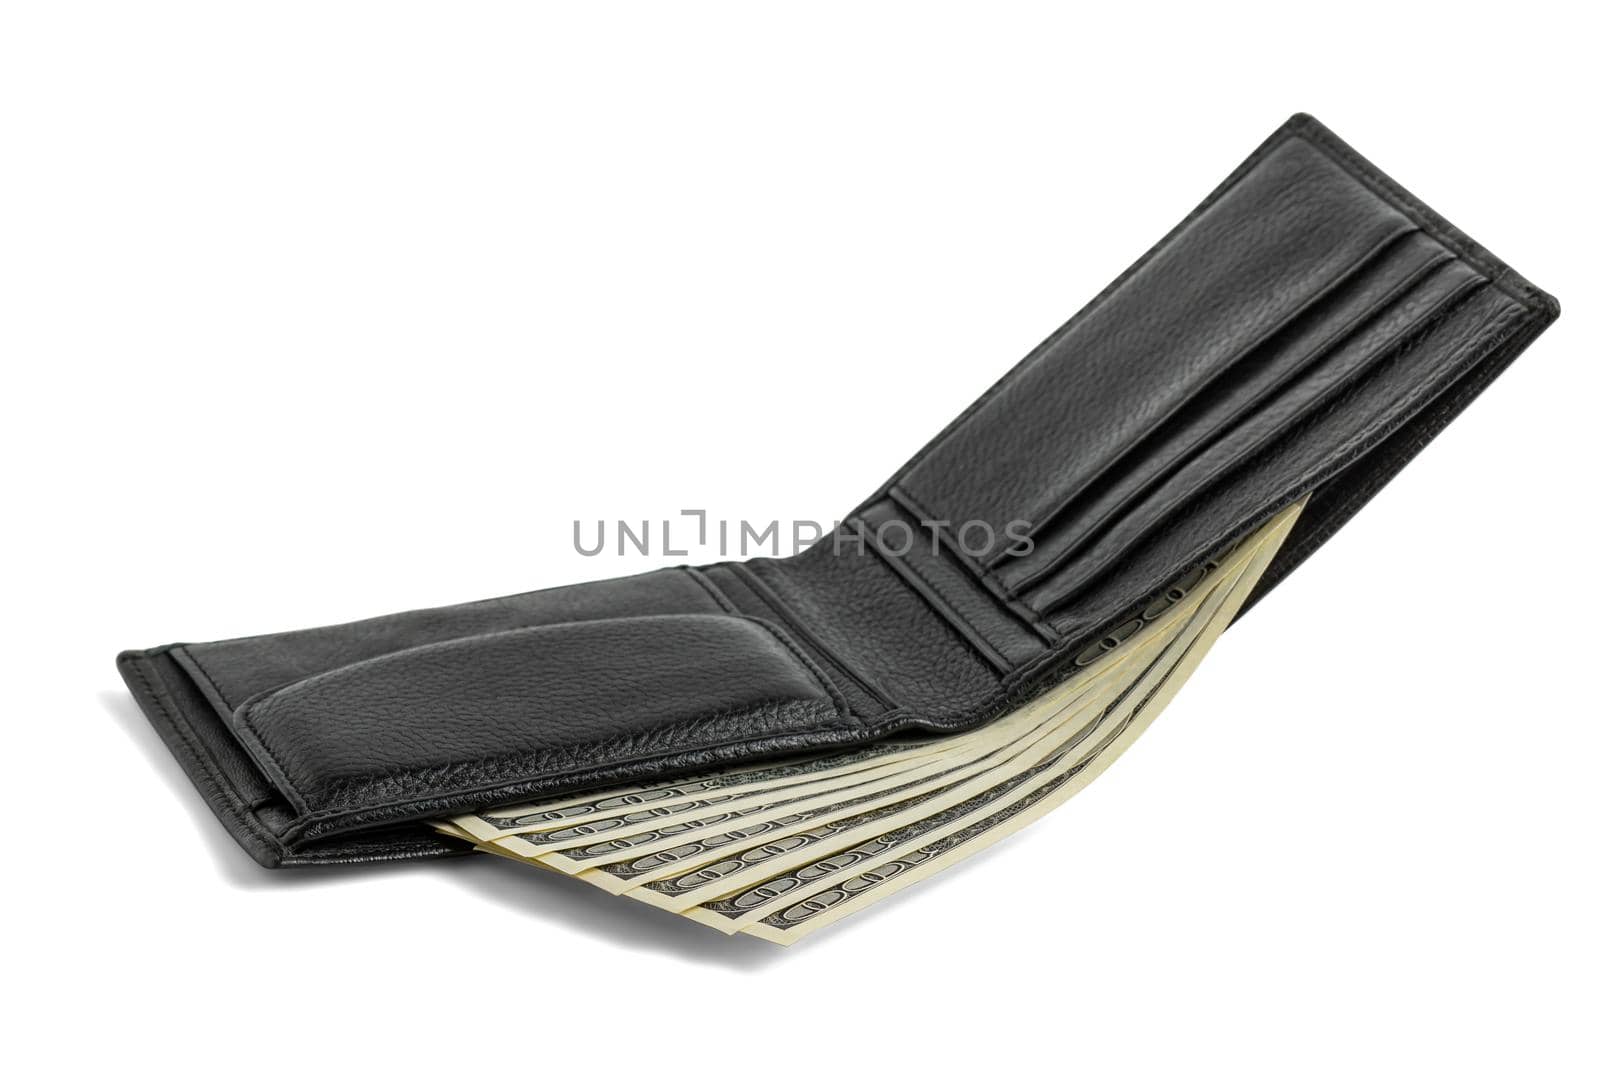 Wallet with banknotes. Paper money in wallet isolated on white with shadow. National currency of the USA.